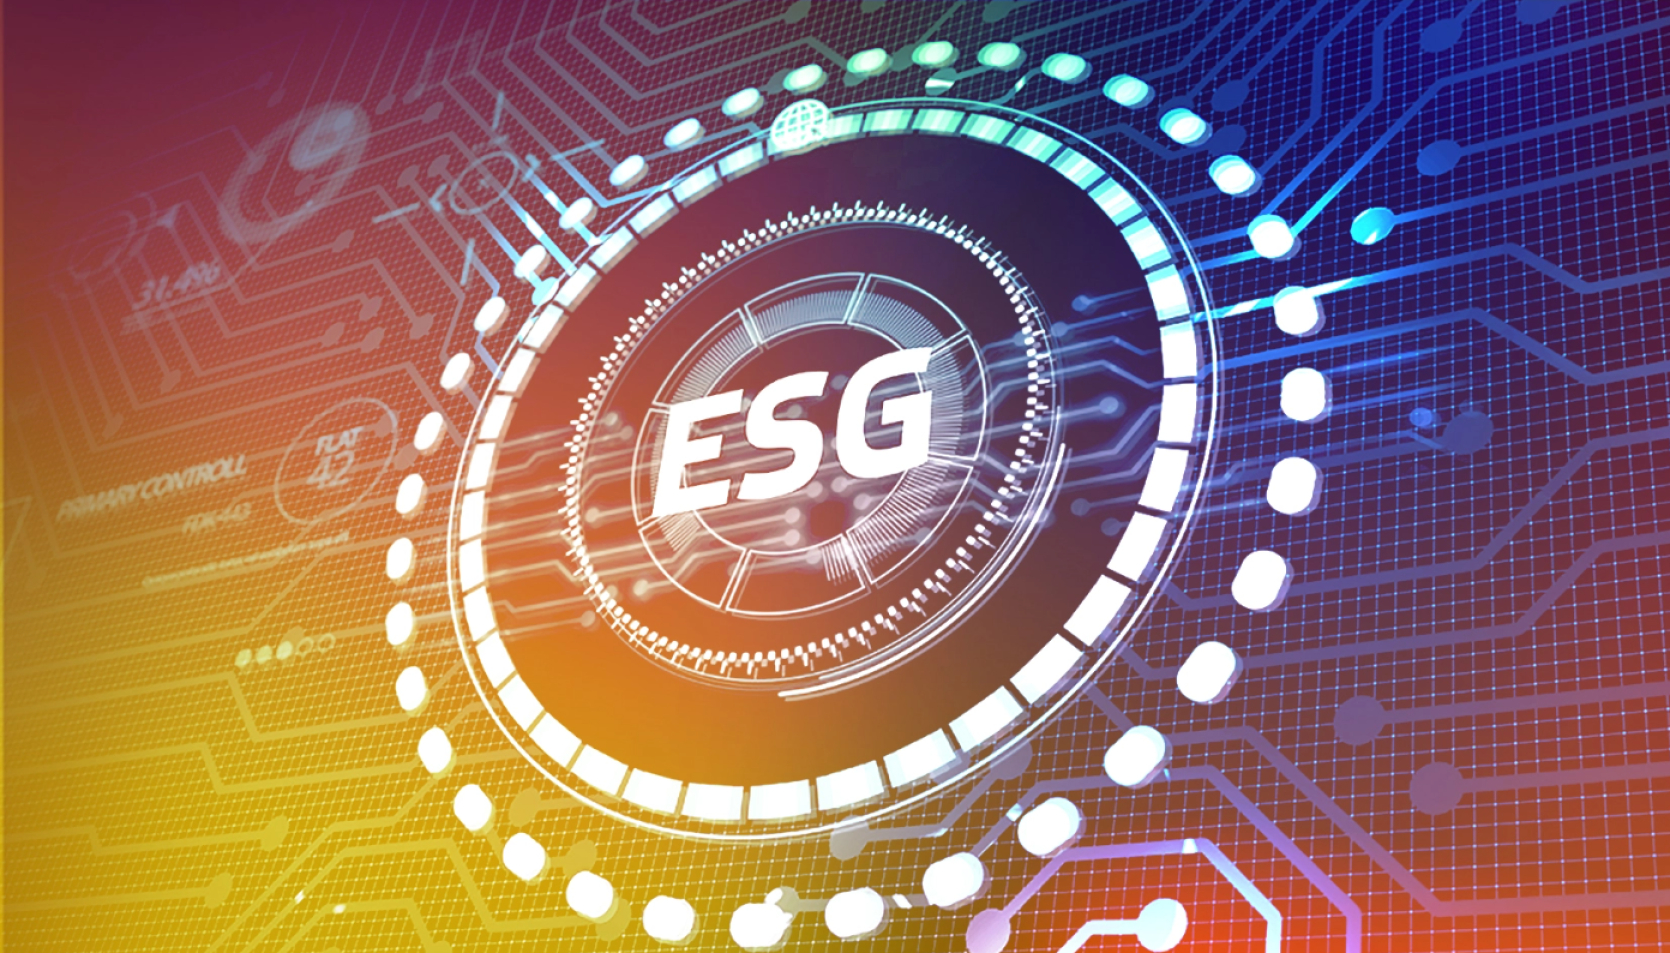 ARE YOU READY FOR AI-DRIVEN RADICAL ESG TRANSPARENCY?